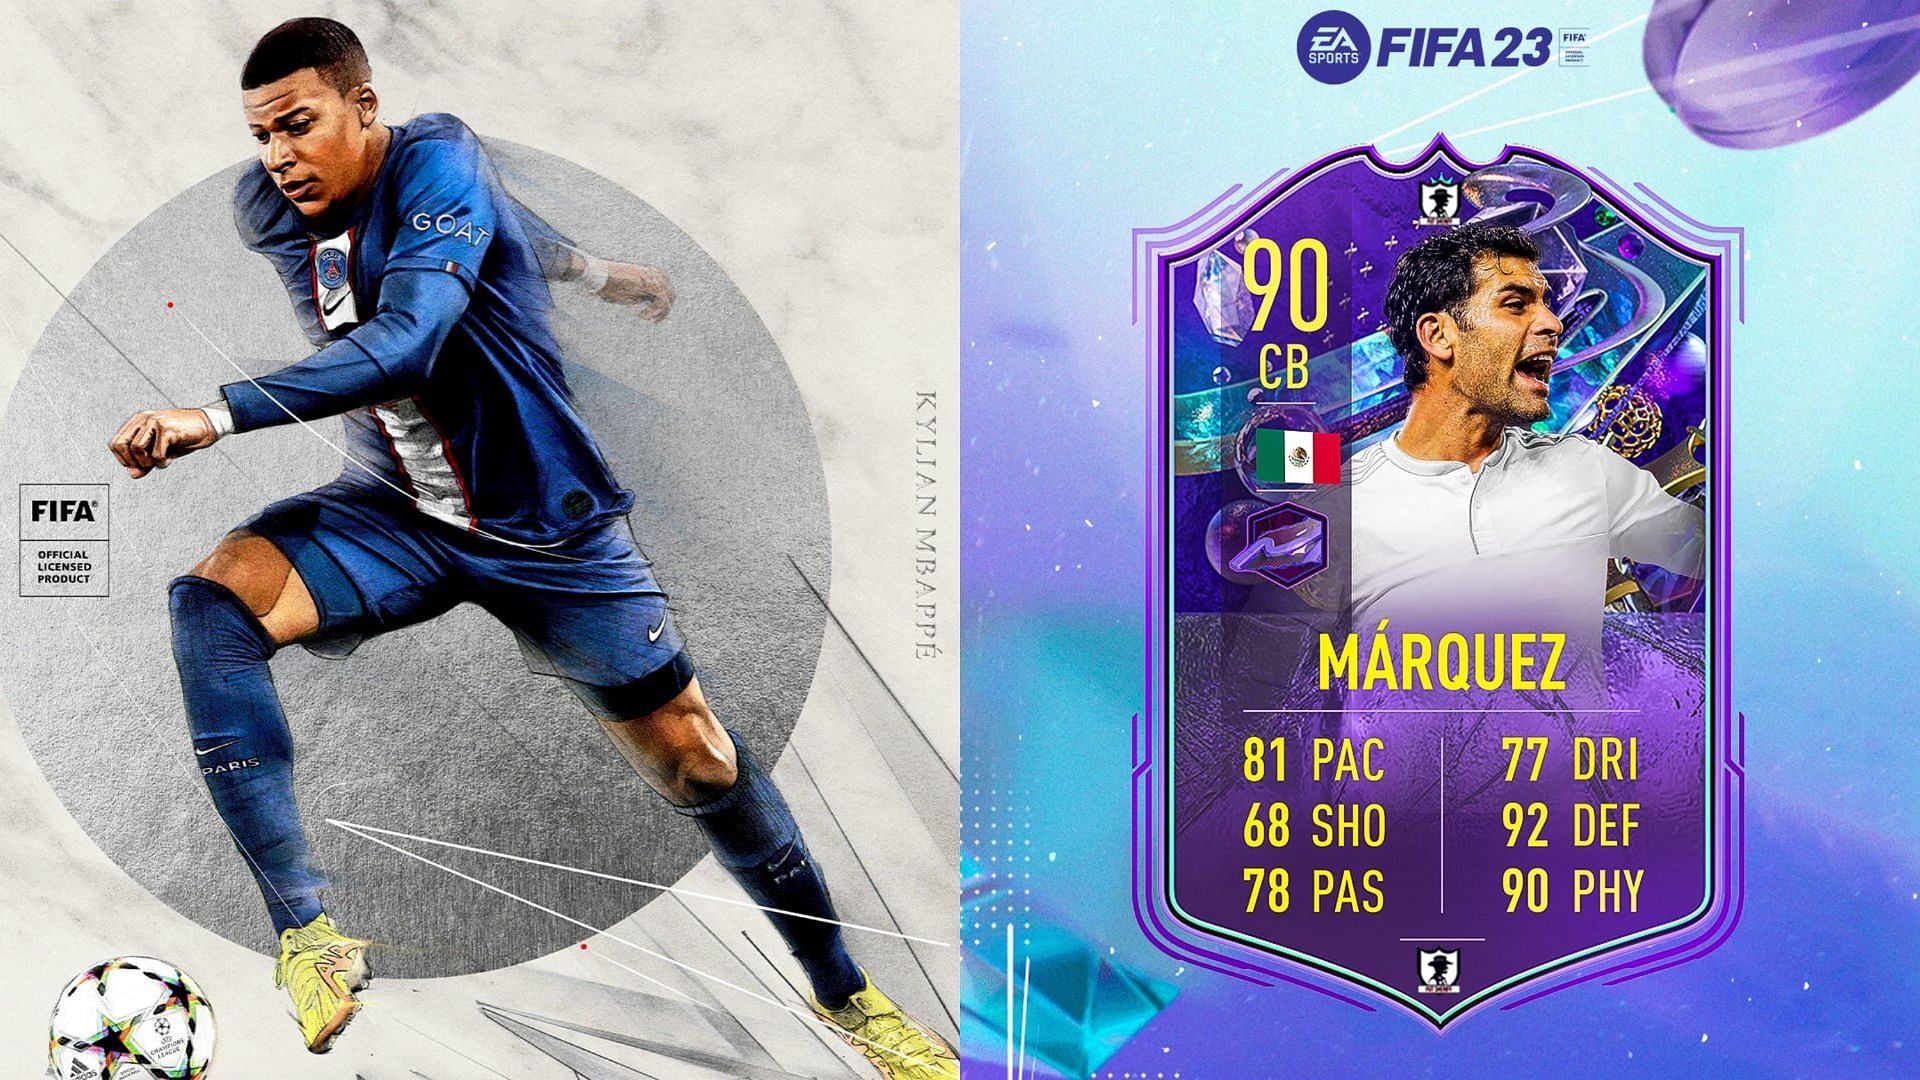 The Rafael Marquez Fantasy FUT card could offer a great alternative option to FIFA 23 players (Images via EA Sports, Twitter/FUT Sheriff)